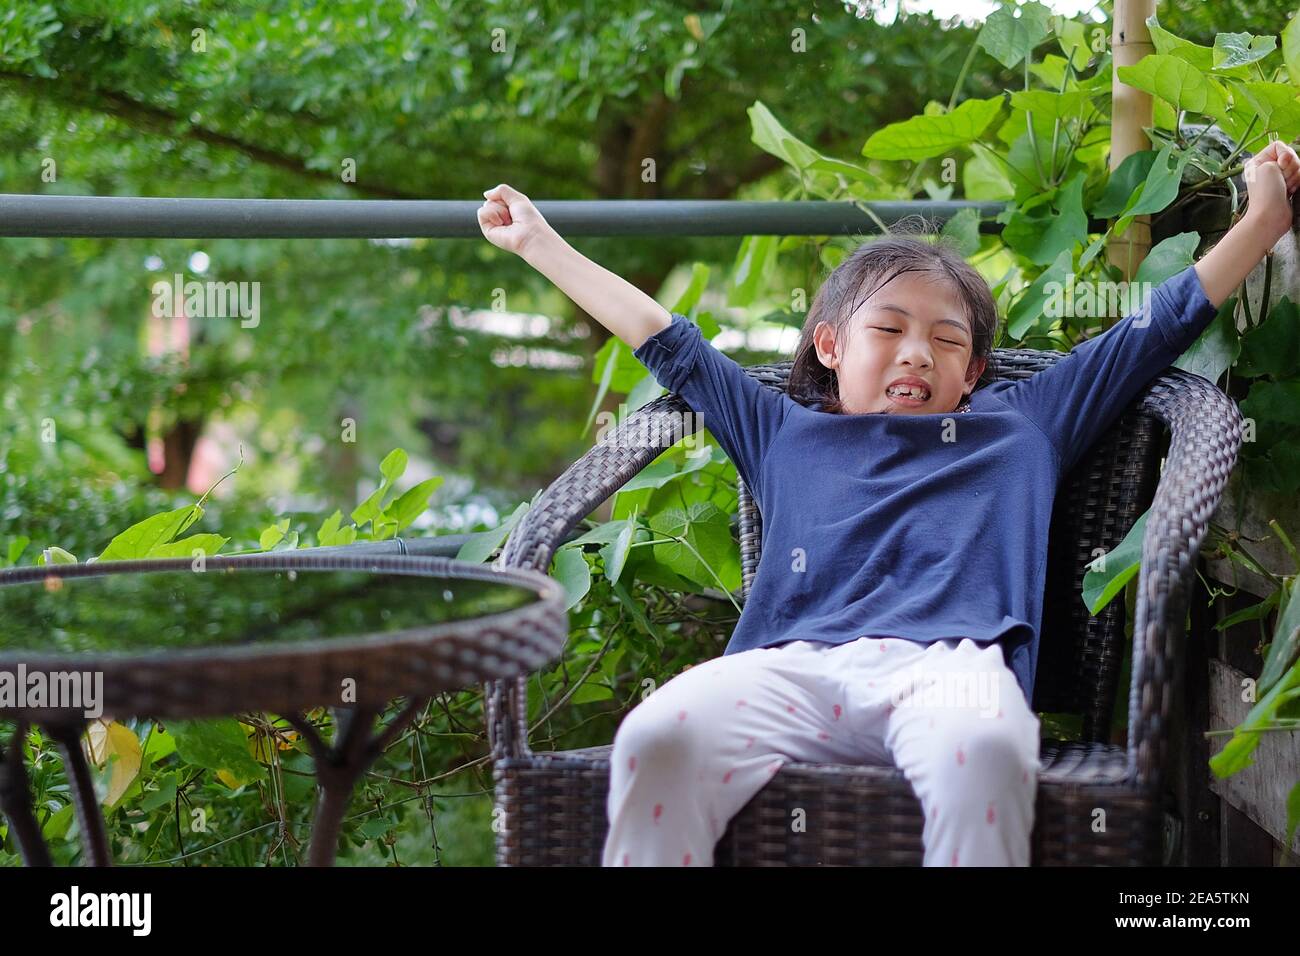 A cute young Asian girl sitting on a big ratton chair feeling bored and sleepy, stretching her arms upward with her eyes closed. Stock Photo